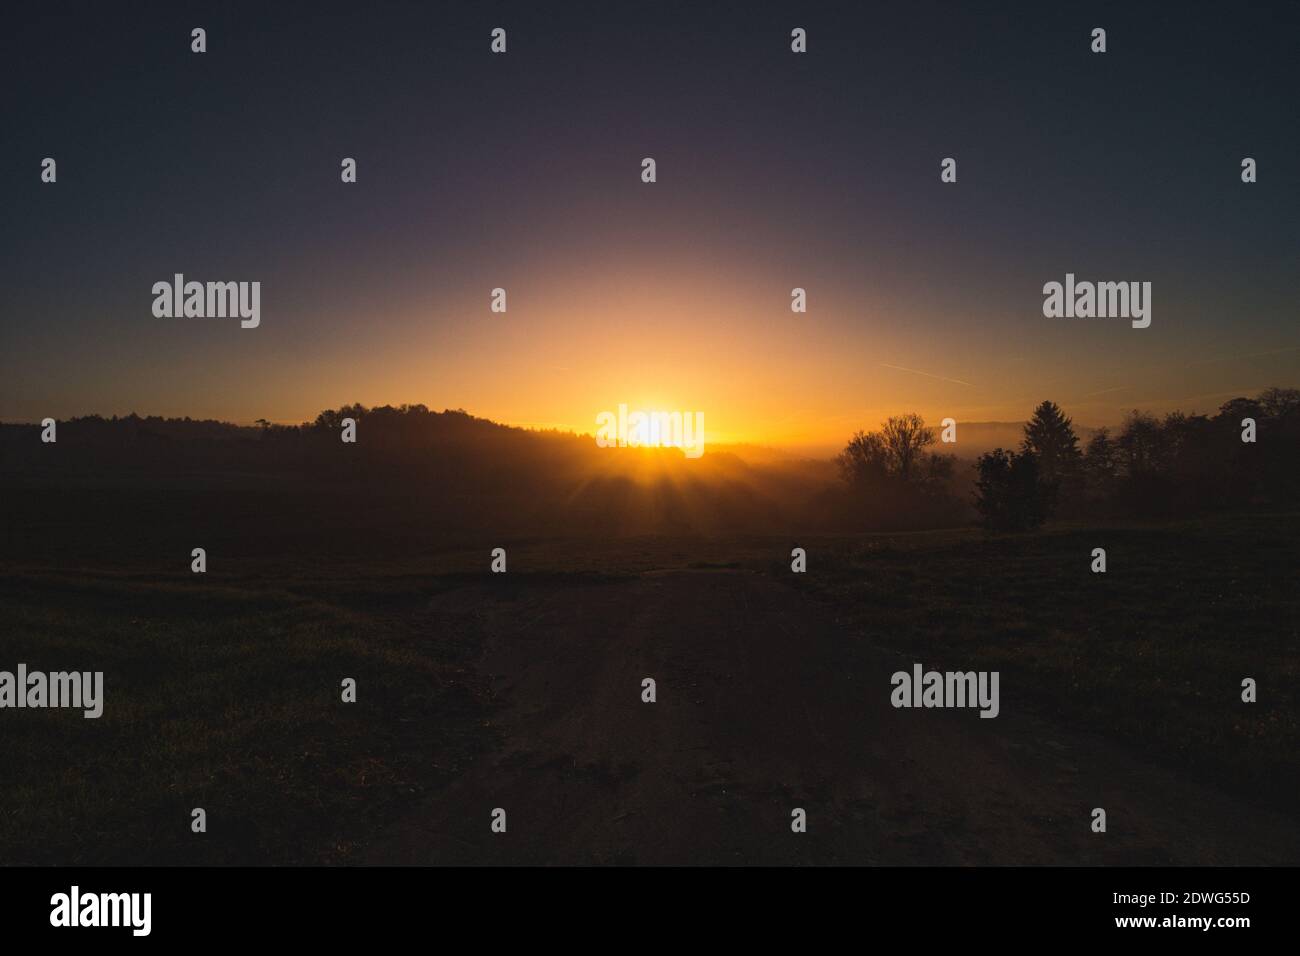 Scenic View Of Silhouette Field Against Sky During Sunset Stock Photo